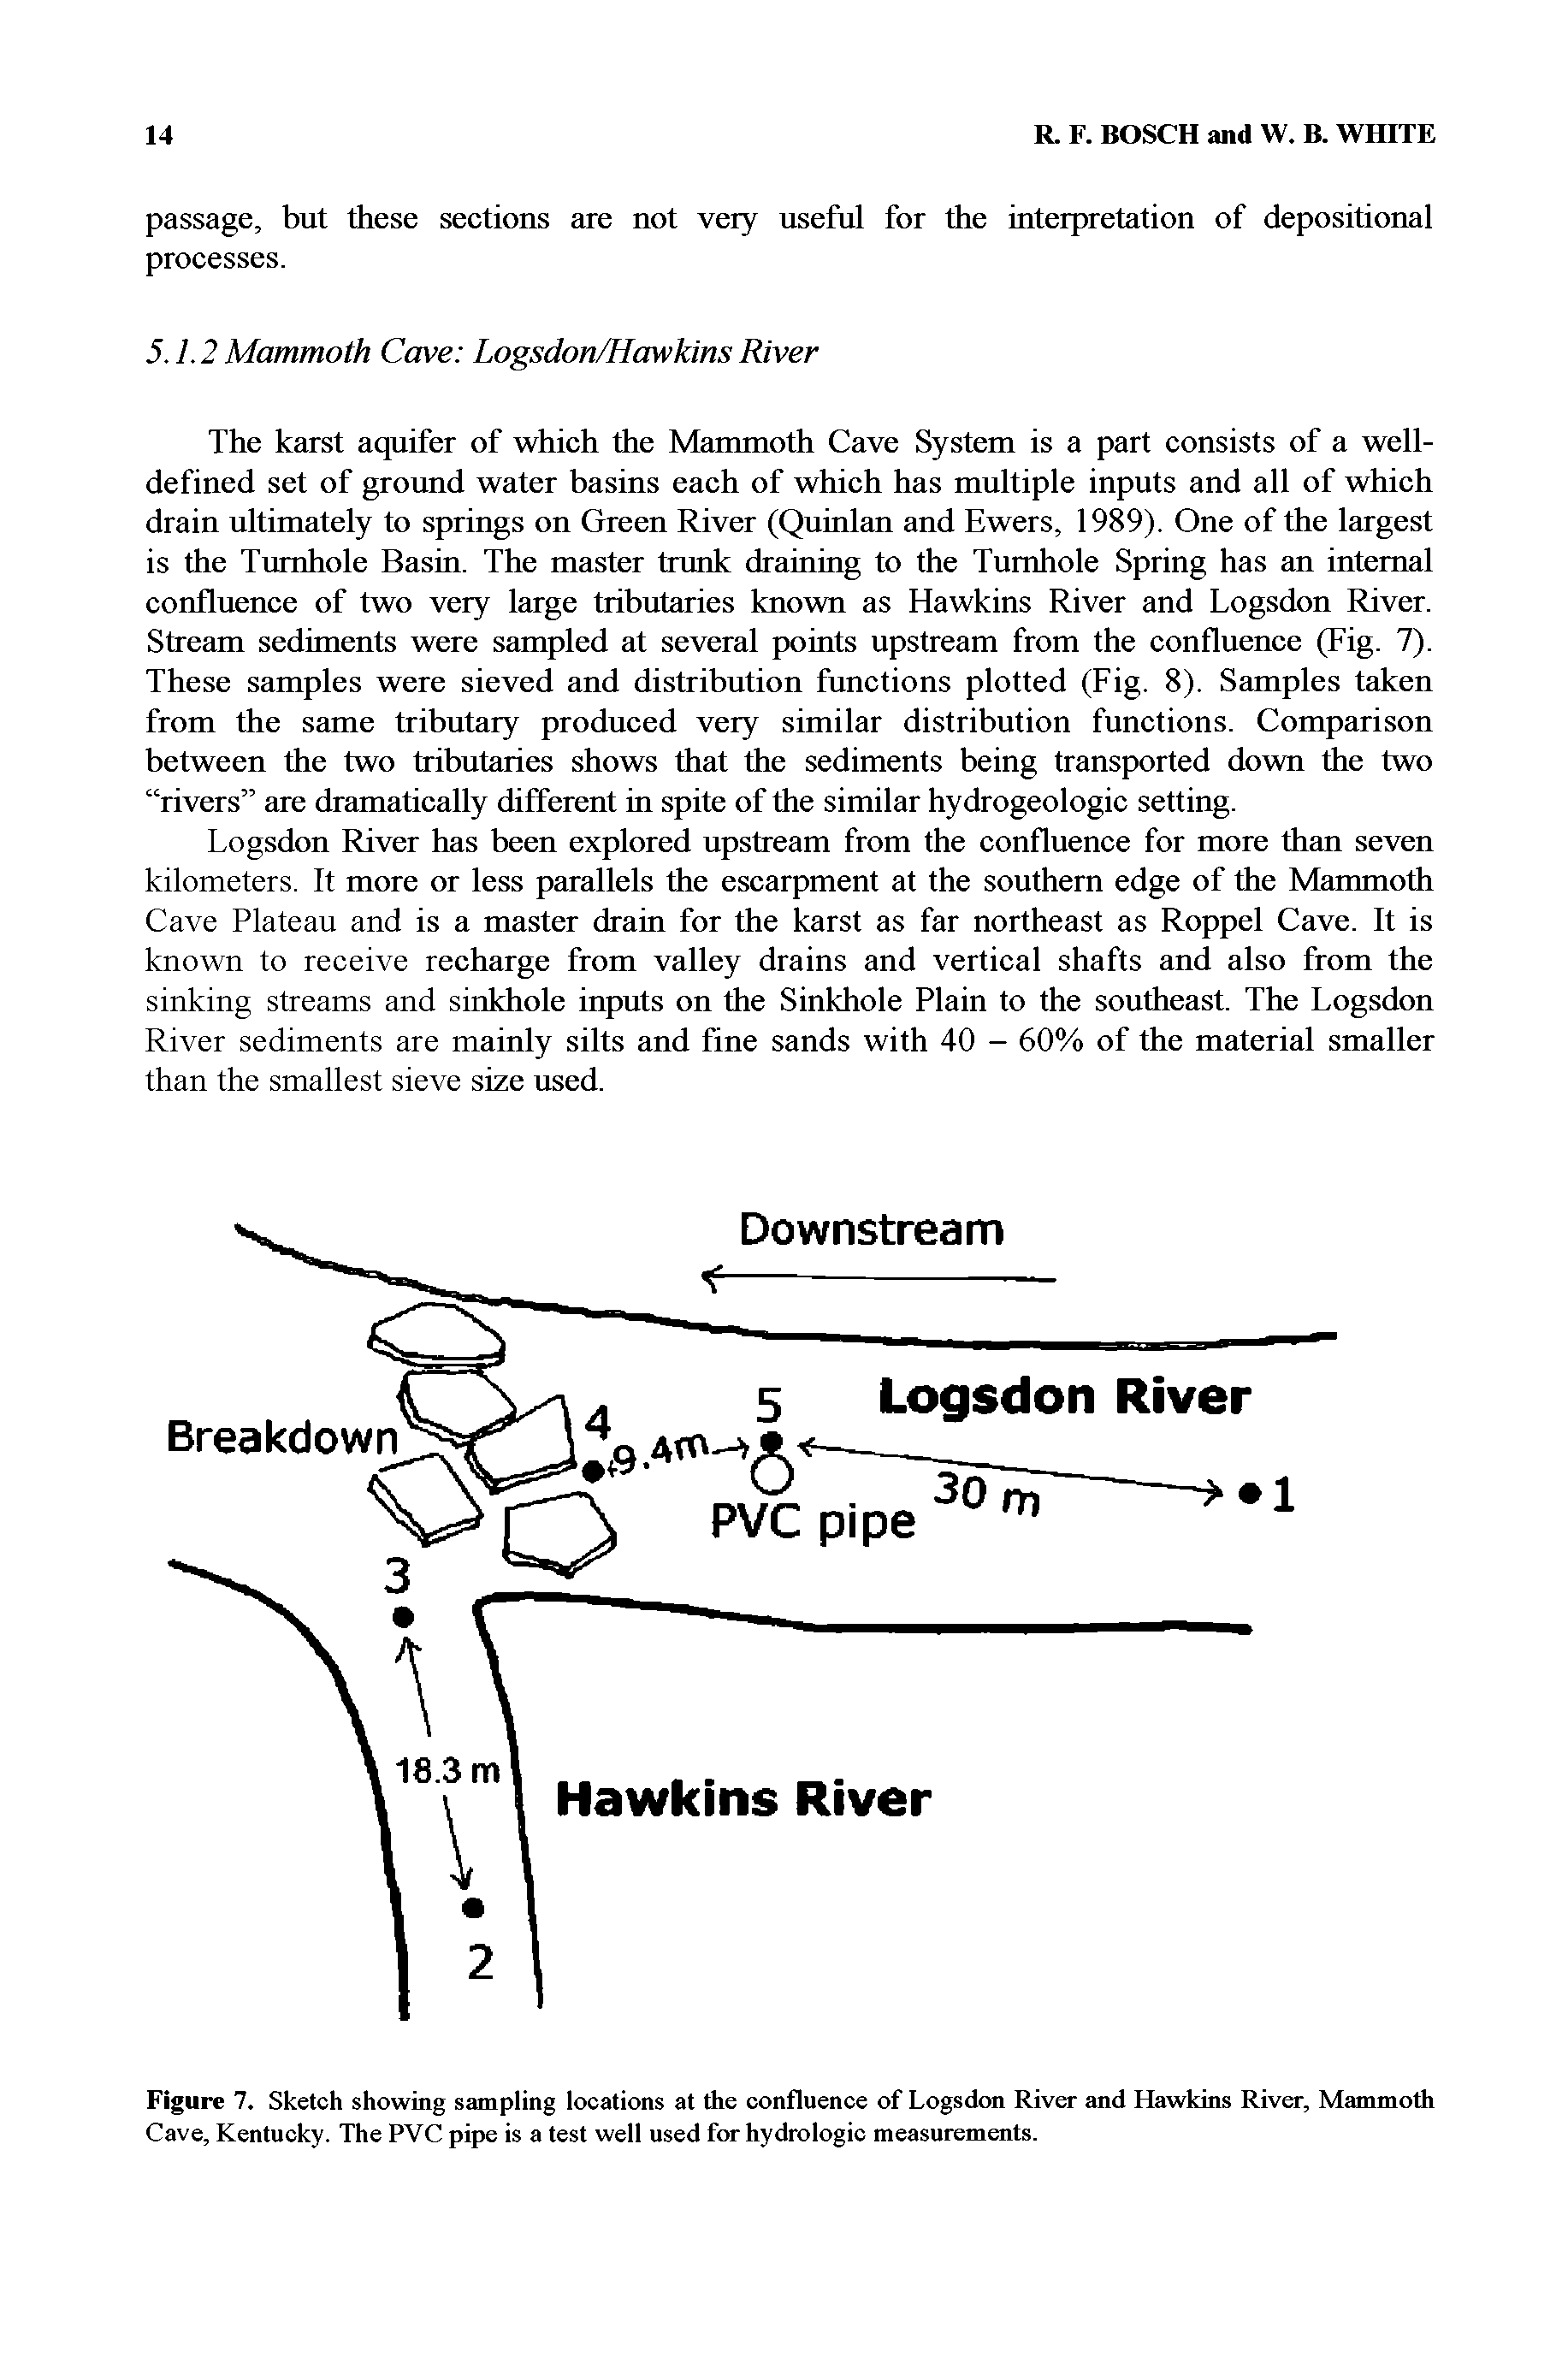 Figure 7. Sketch showing sapling locations at tfie confluence of Logsdon River and Hawkins River, M nmodi Cave, Kentucky. The PVC pipe is a test well used for hydrologic measurements.